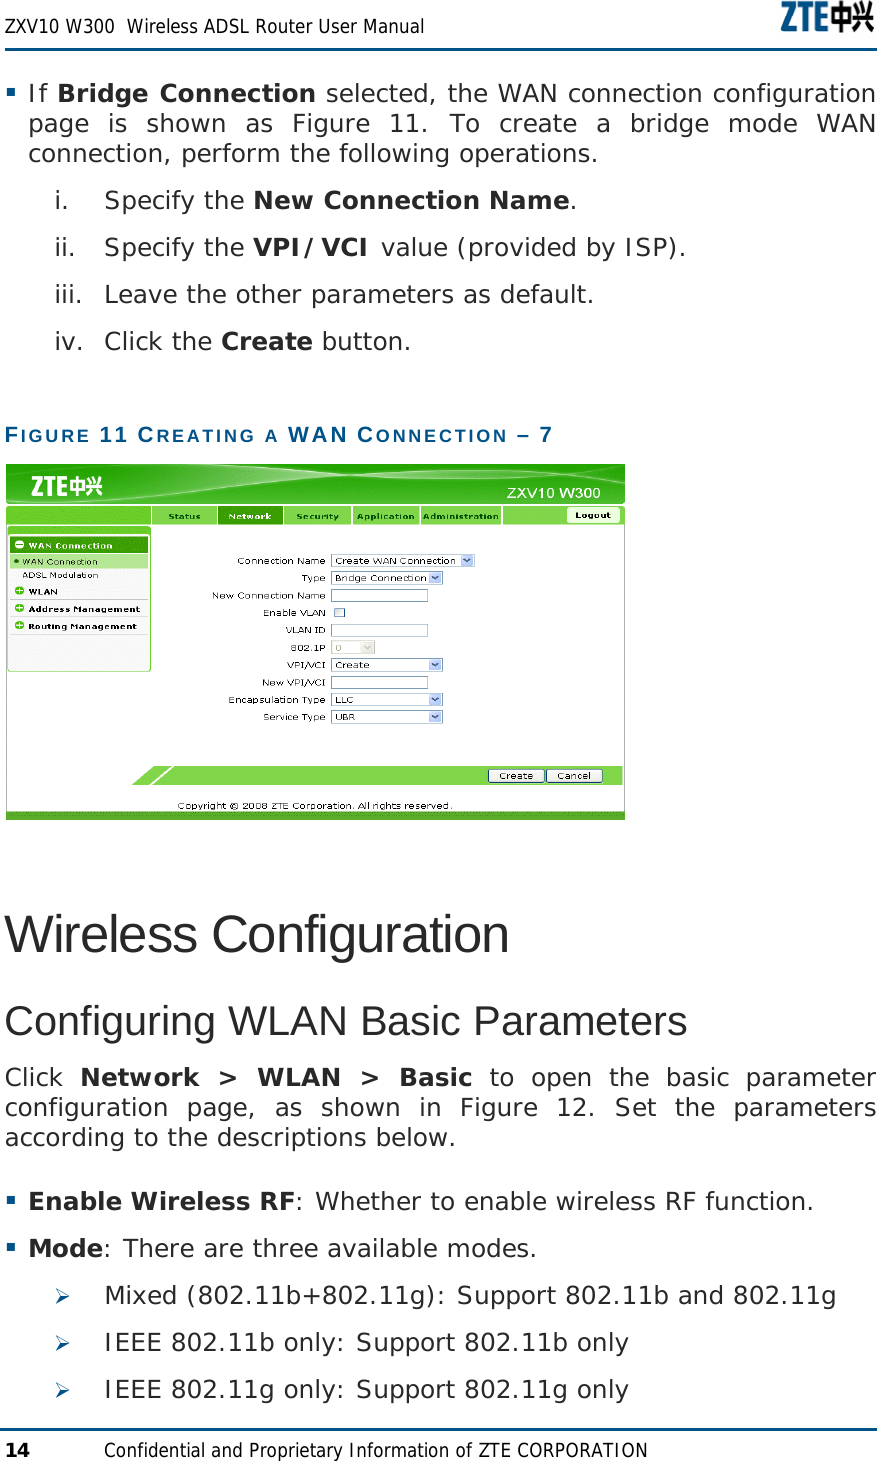  ZXV10 W300  Wireless ADSL Router User Manual  14  Confidential and Proprietary Information of ZTE CORPORATION  If Bridge Connection selected, the WAN connection configuration page is shown as Figure 11. To create a bridge mode WAN connection, perform the following operations. i. Specify the New Connection Name. ii. Specify the VPI/VCI value (provided by ISP). iii. Leave the other parameters as default. iv. Click the Create button. FIGURE 11 CREATING A WAN CONNECTION – 7  Wireless Configuration Configuring WLAN Basic Parameters Click  Network &gt; WLAN &gt; Basic to open the basic parameter configuration page, as shown in Figure 12. Set the parameters according to the descriptions below.  Enable Wireless RF: Whether to enable wireless RF function.  Mode: There are three available modes. ¾ Mixed (802.11b+802.11g): Support 802.11b and 802.11g ¾ IEEE 802.11b only: Support 802.11b only ¾ IEEE 802.11g only: Support 802.11g only 